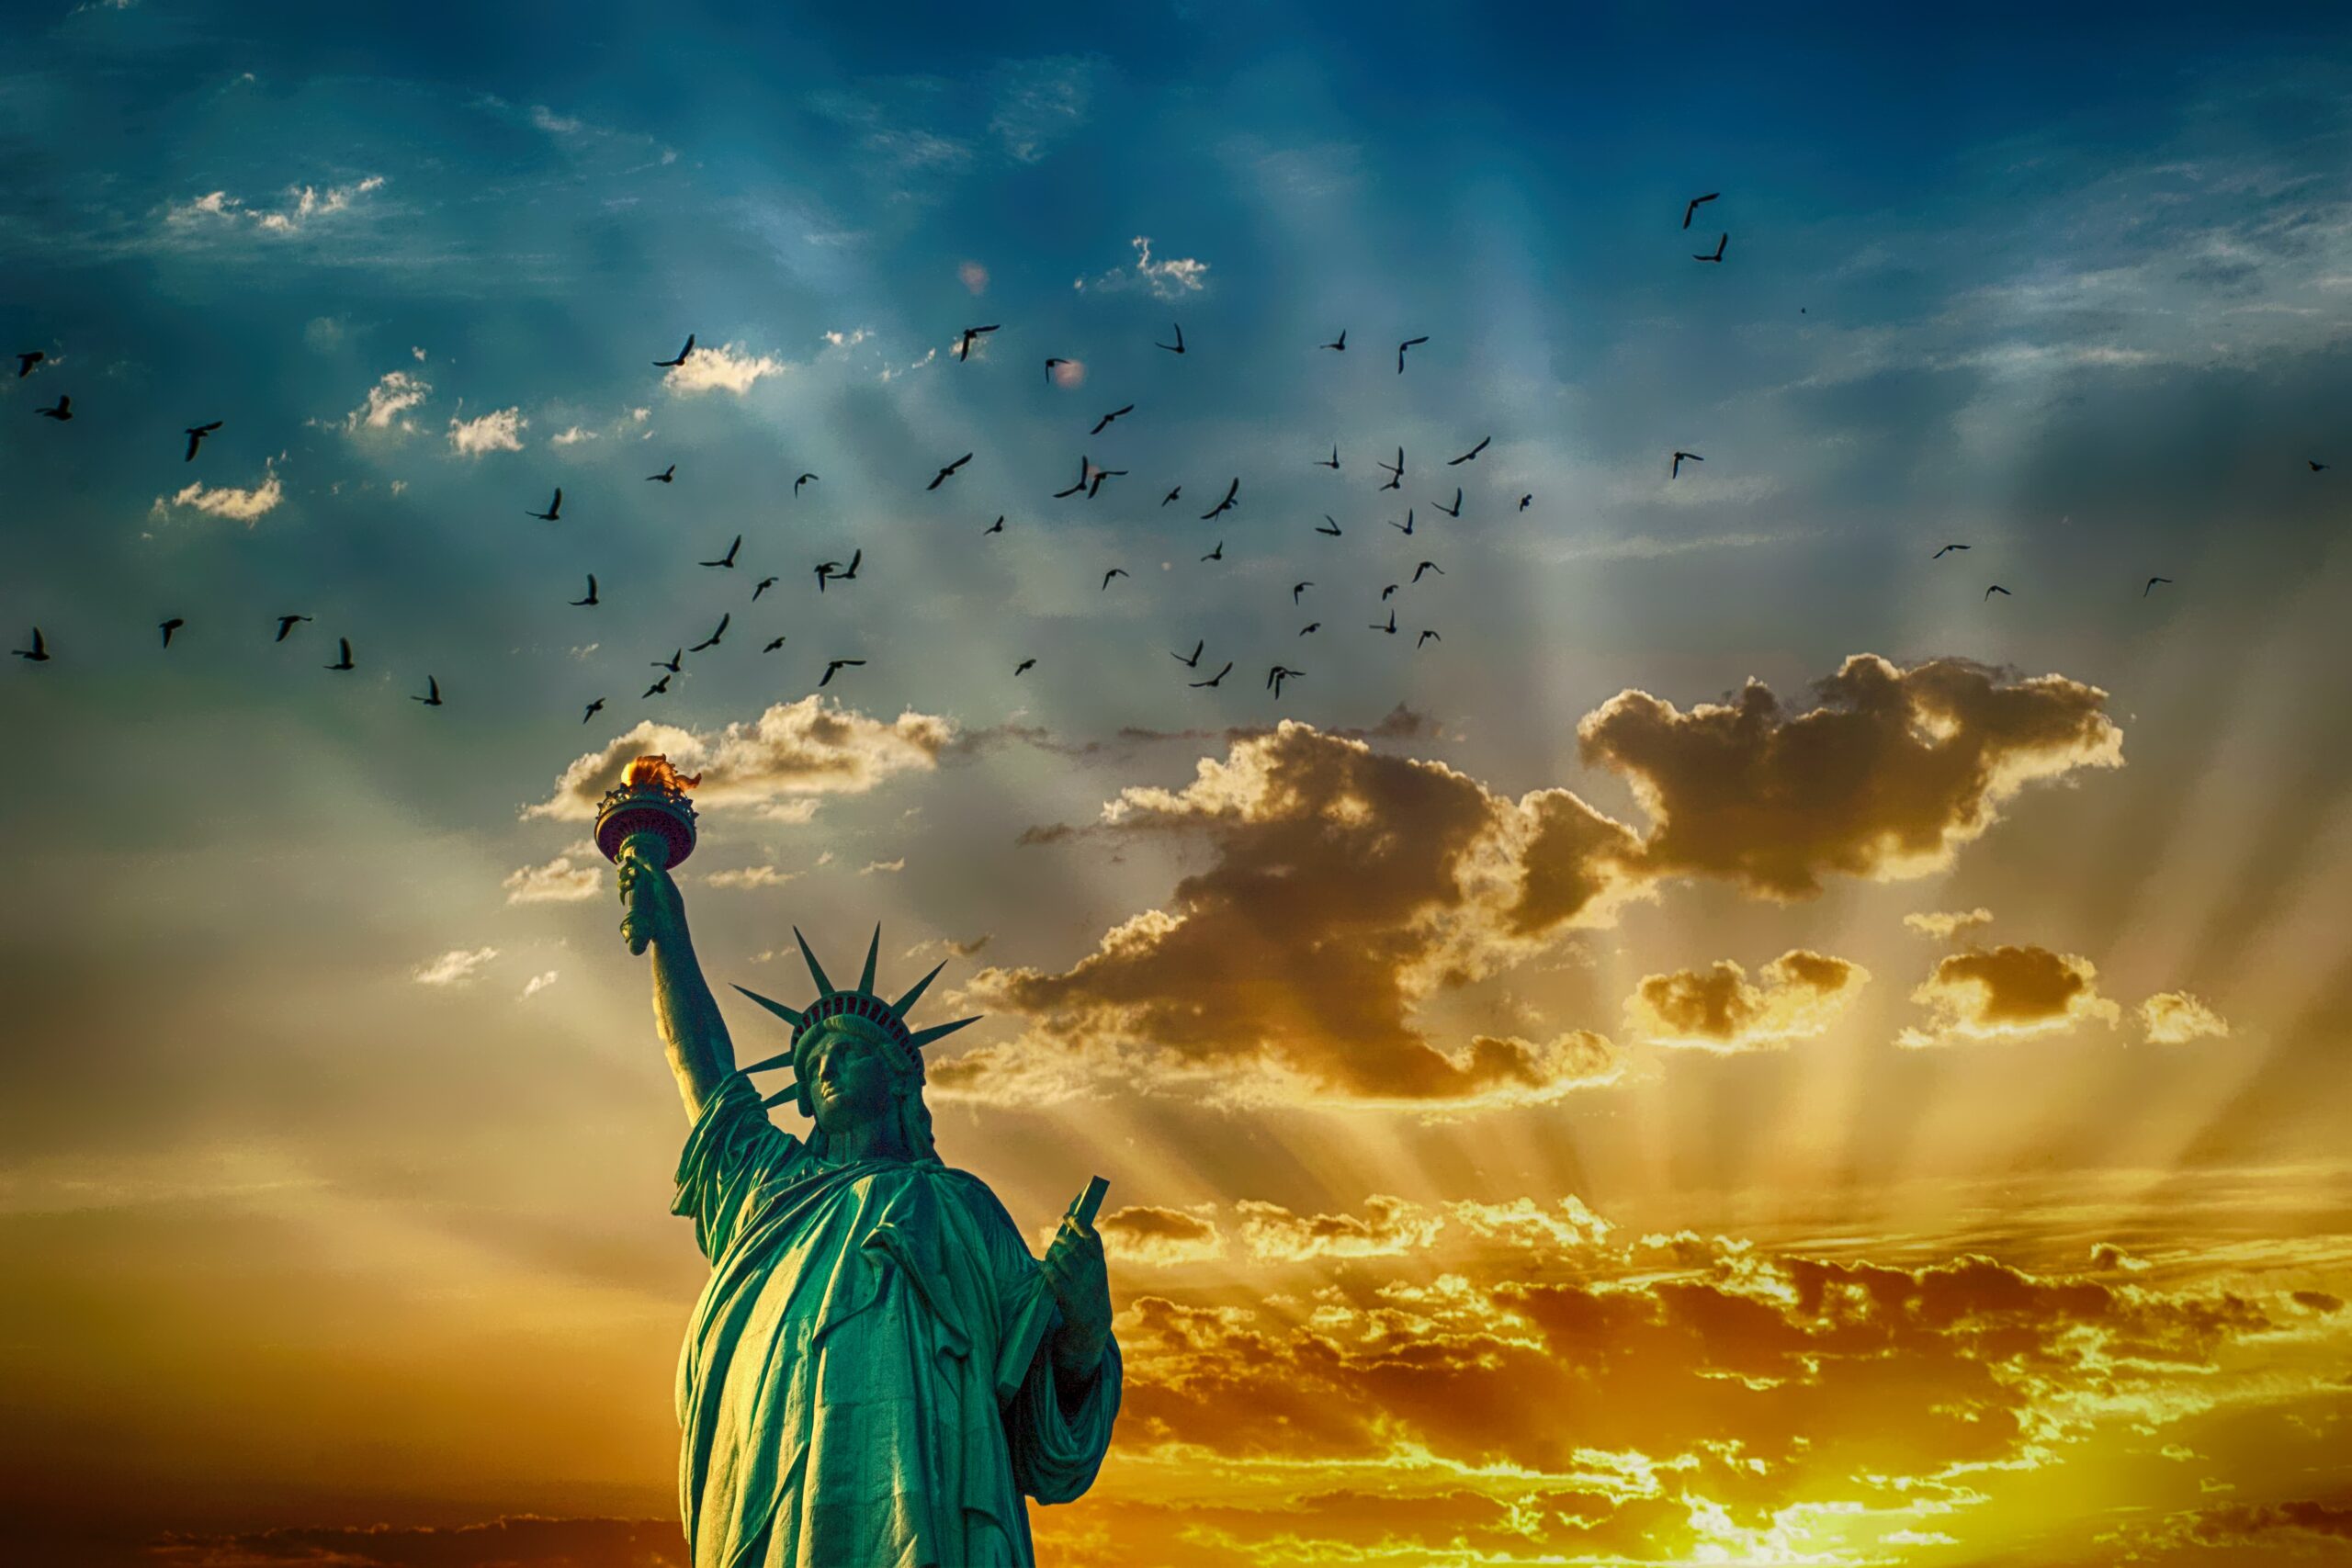 Statue-of-Liberty-great-sky